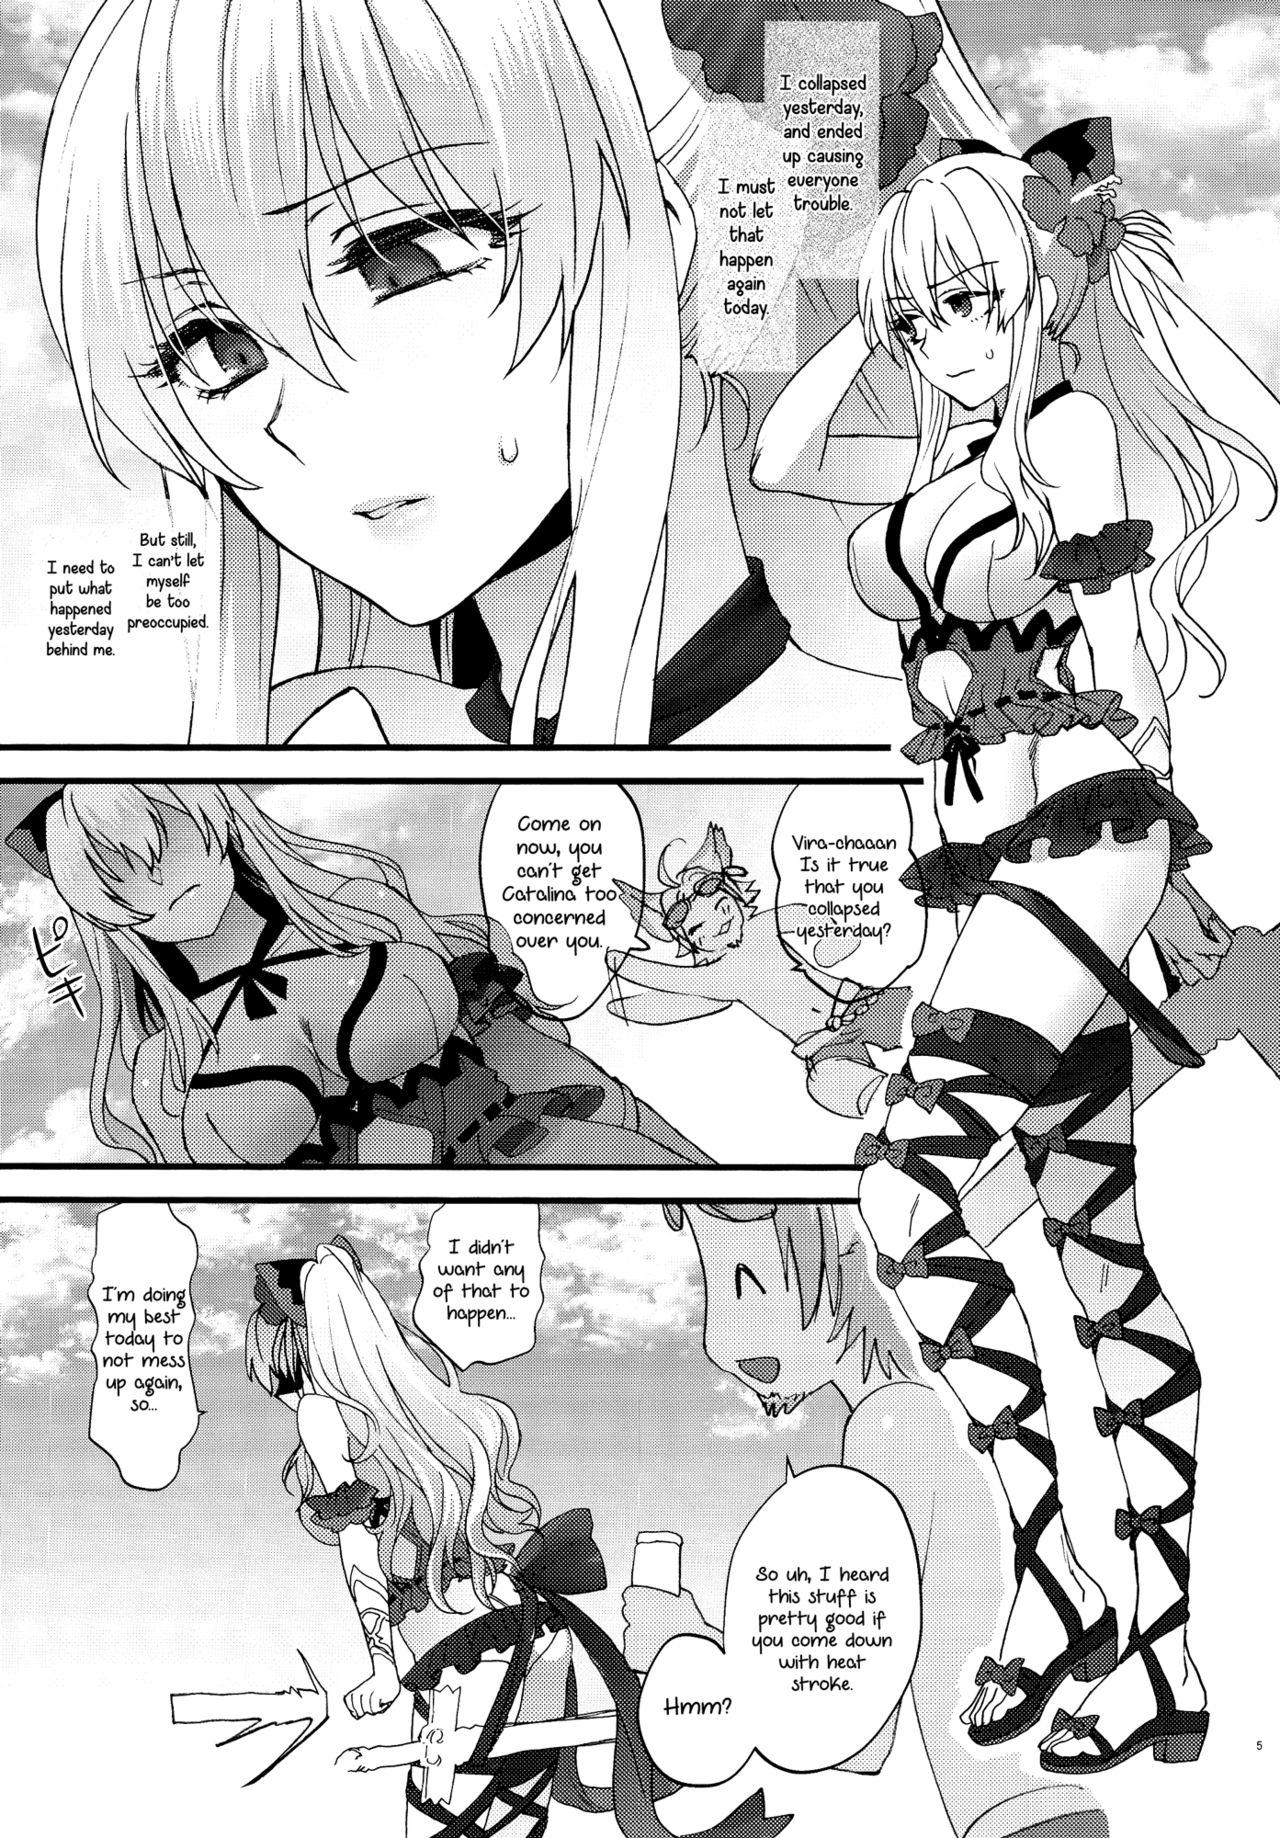 Cameltoe Yousei-tachi no Itazura | A Prank The Fairies Played On Us - Granblue fantasy Gay Theresome - Page 5